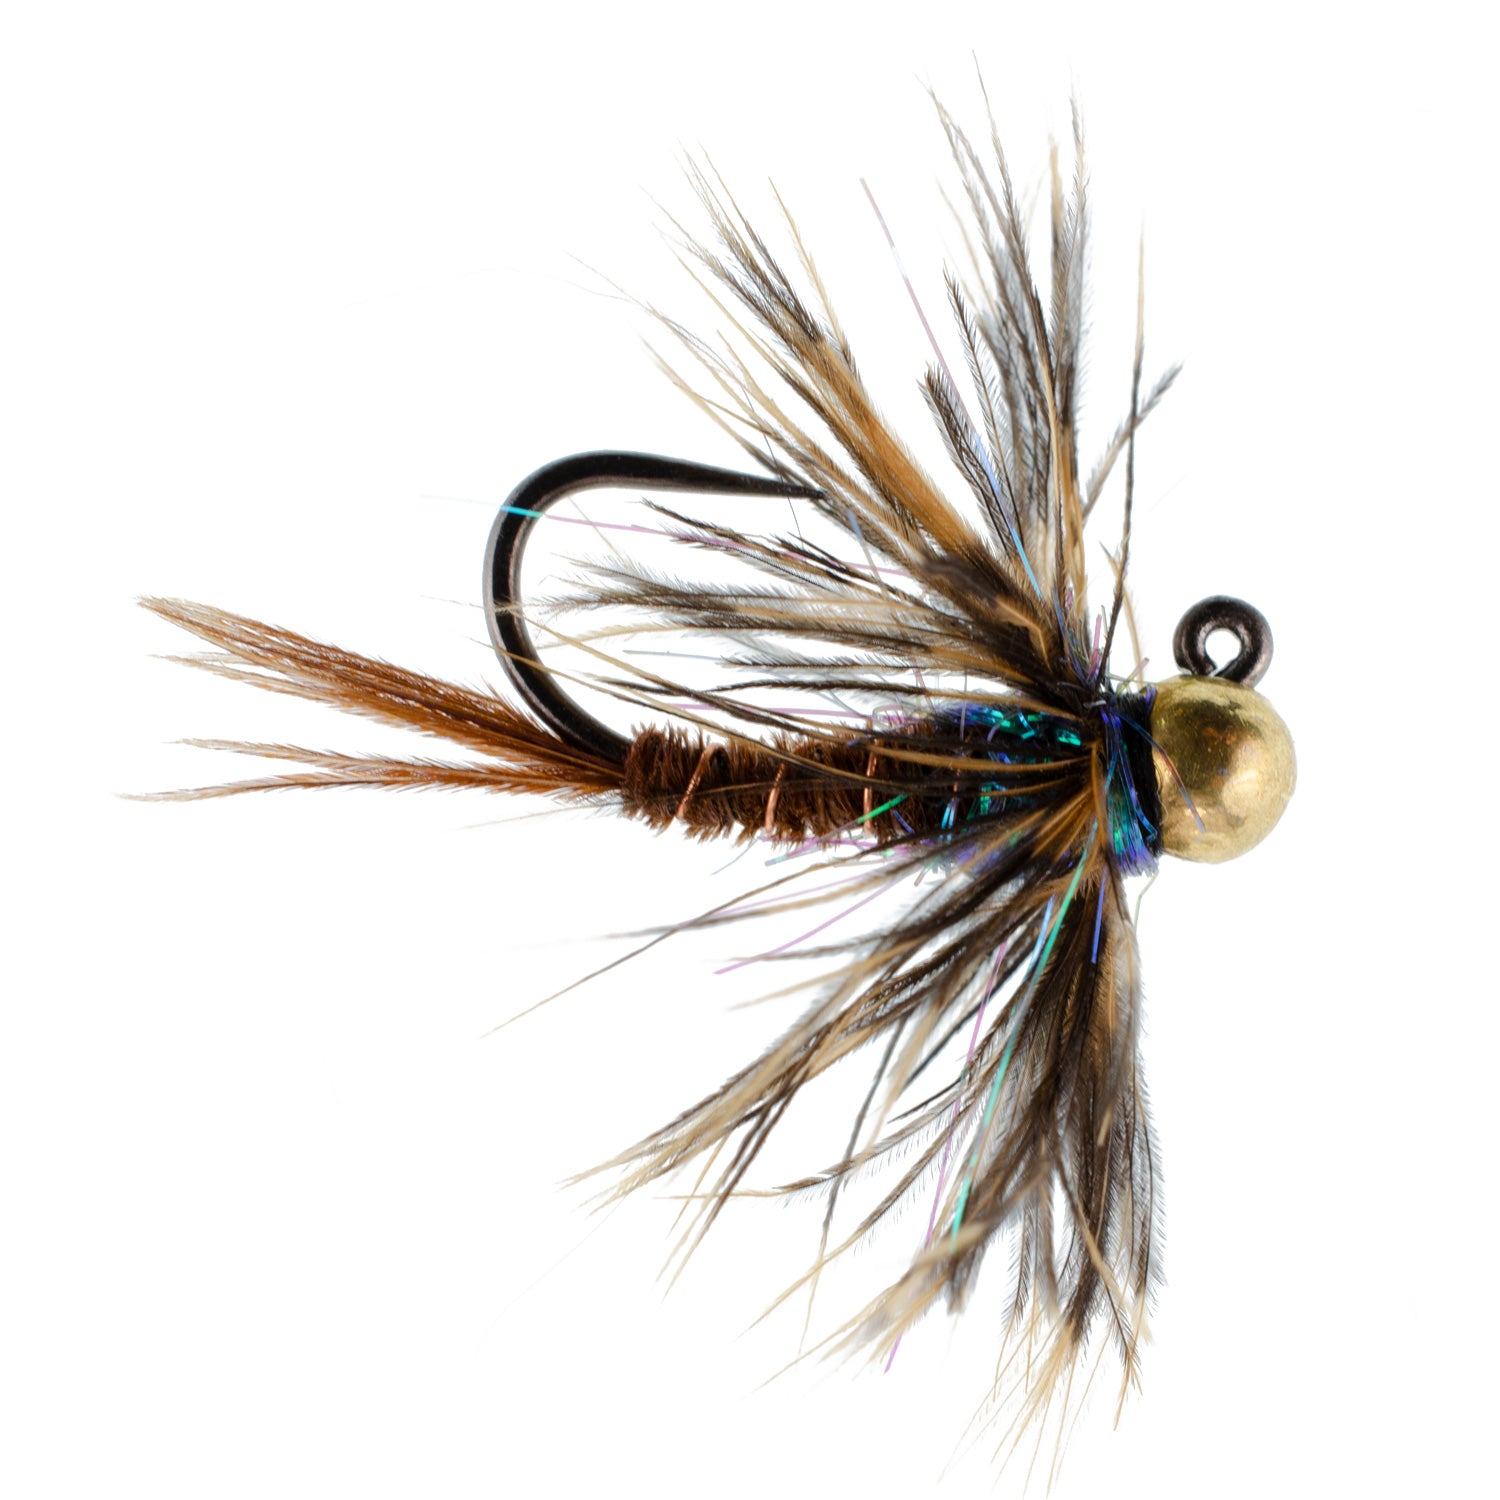 Tungsten Bead Soft Hackle Pheasant Tail Tactical Jig Czech Nymph Euro Nymphing Fly - 6 Flies Size 14